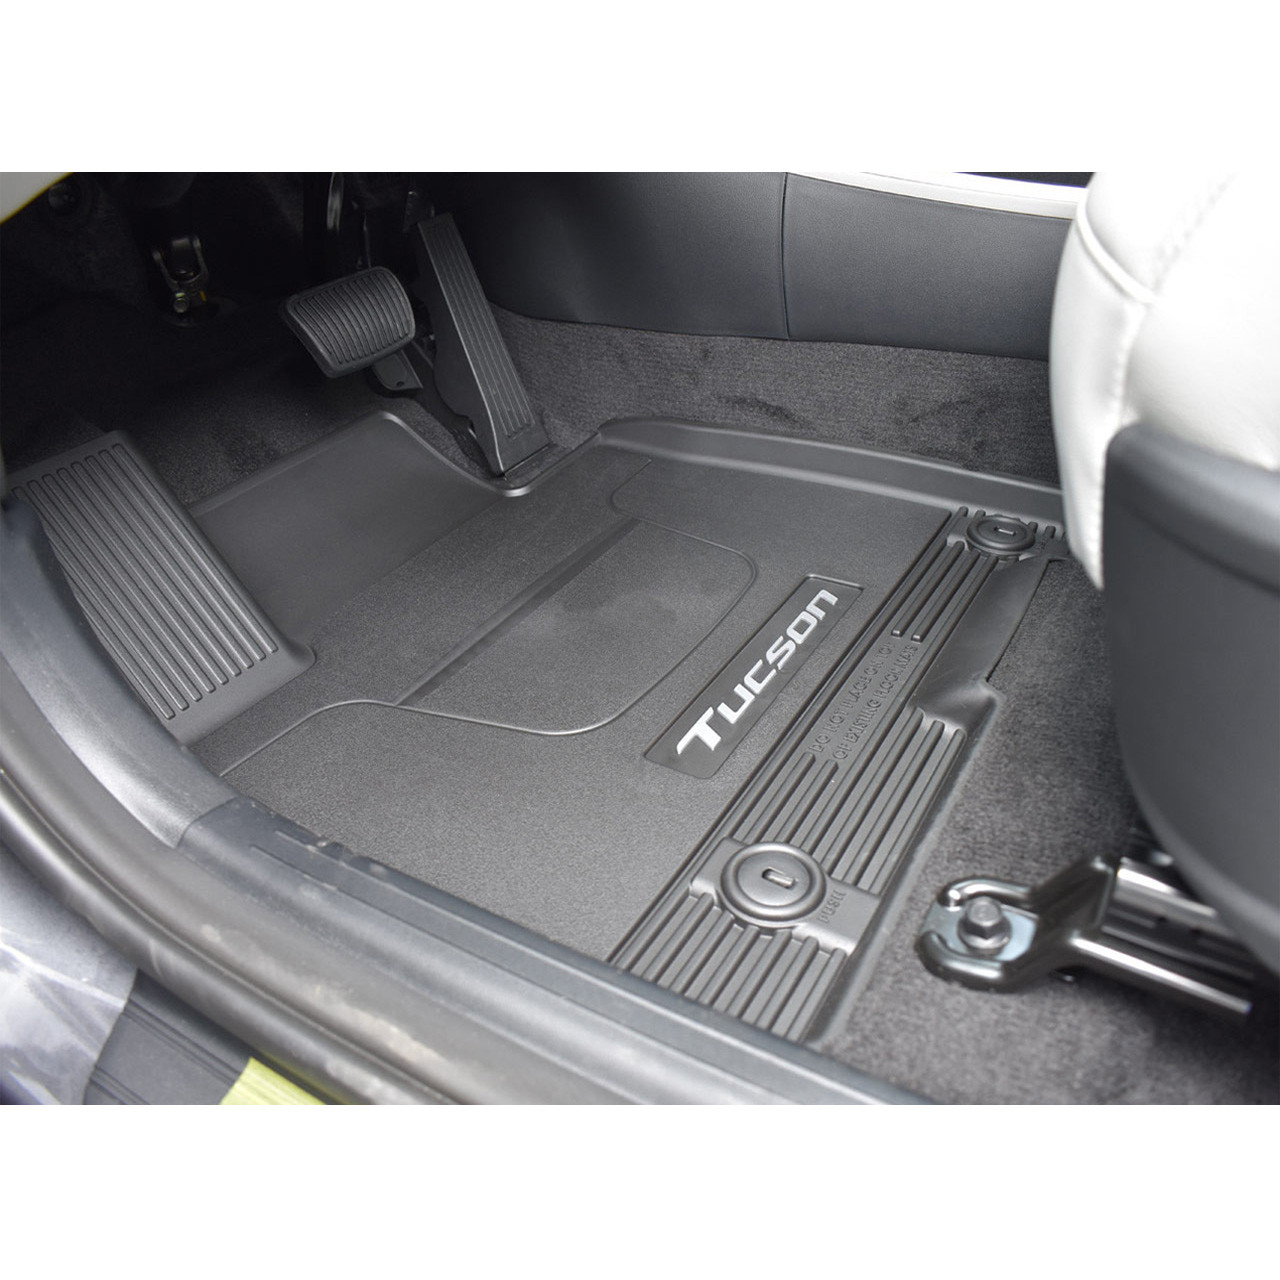 EVA Mats online store offers to buy EVA car mats for trunk and cabin.  Seamless customer support and fast delivery.